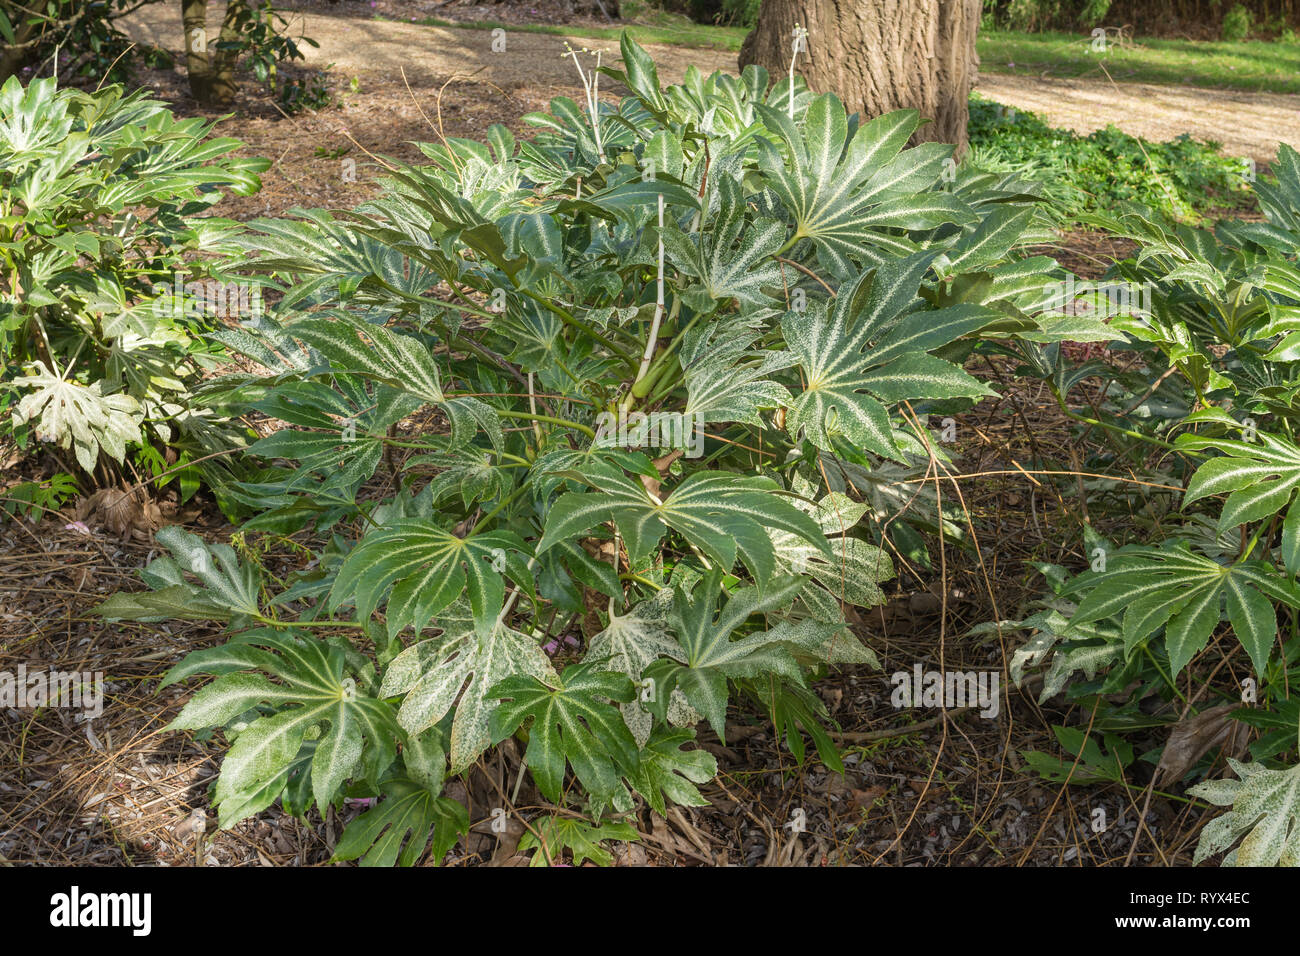 Fatsia japonica 'spider's web' or Japanese aralia, a plant with variegated foliage Stock Photo